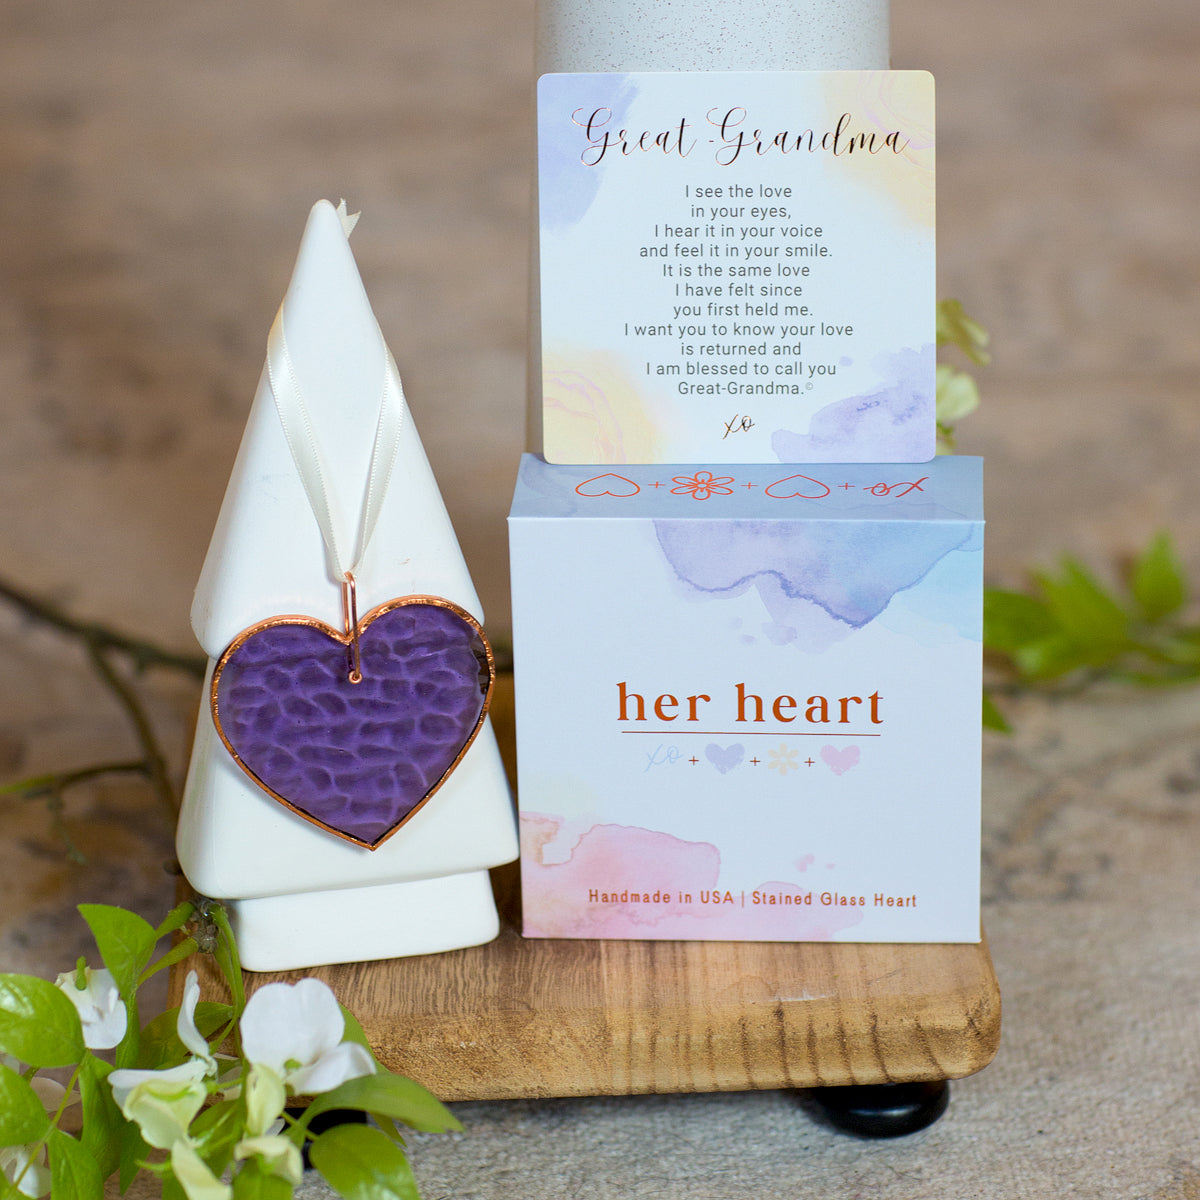 Her Heart for Great-Grandma gift with box, sentiment card, and purple stain glass heart.